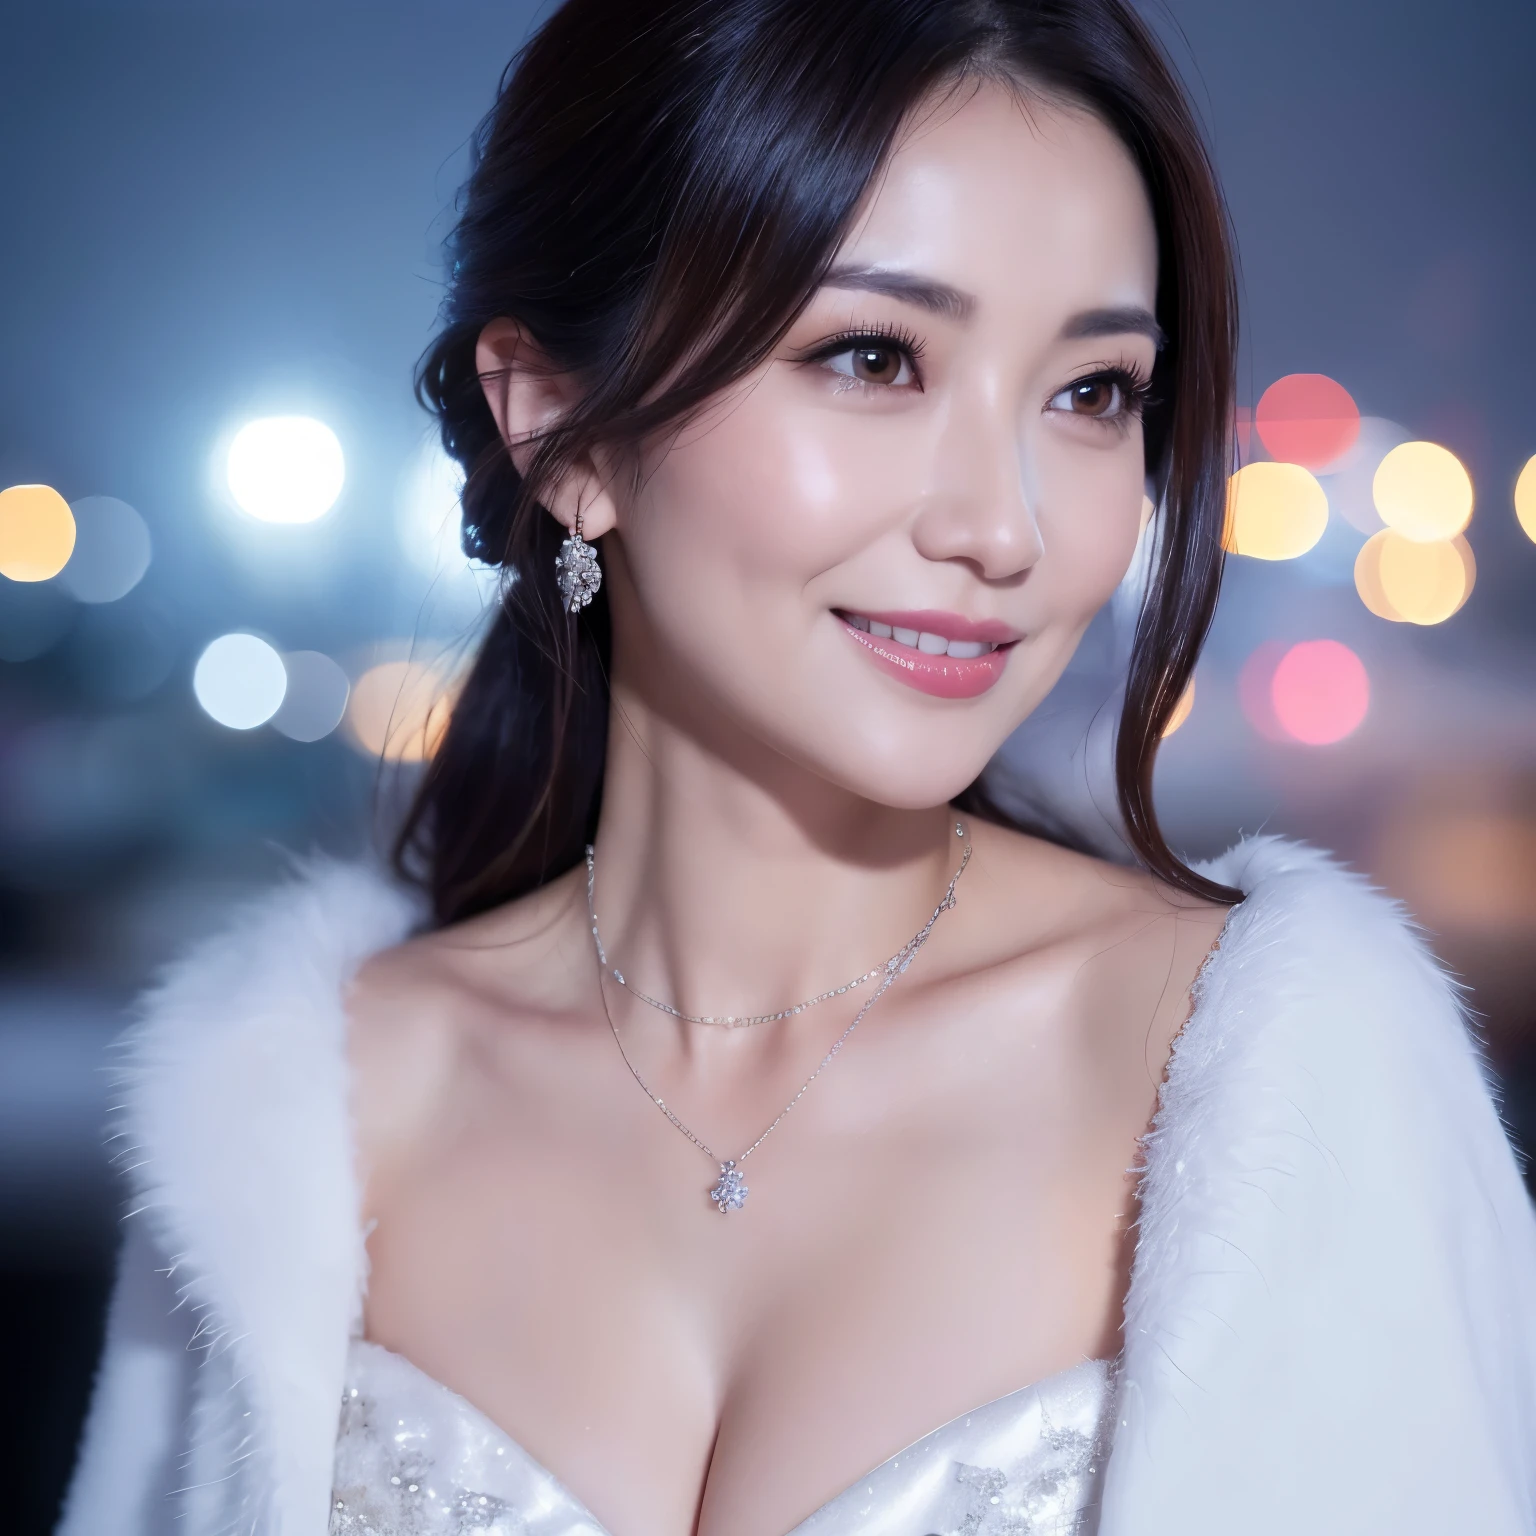 ((highest quality、table top、8K、best image quality、Award-winning work))、one beautiful mature woman、45 year old mature woman、smile looking at me、(close up of face:1.4)、(cleavage:1.2)、(big breasts:1.2)、(elegant thick fur coat:1.1)、epic movie lighting、(romantic love feelings:1.1)、(The most romantic and moody atmosphere:1.1)、winter city、Snowy landscape in the city、(The snow in the air sparkles finely:1.1)、(It&#39;s snowing heavily:1.1)、(Tyndall effect:1.1)、(Night view of the city with snow falling:1.2)、Shining beautiful skin、(accurate anatomy:1.1)、Ultra high definition beauty face、long eyelashes、natural makeup、ultra high definition hair、Ultra high definition eyes、(Shining beautiful skin with ultra-high resolution:1.1)、Super high resolution glossy lips、radiant beautiful skin